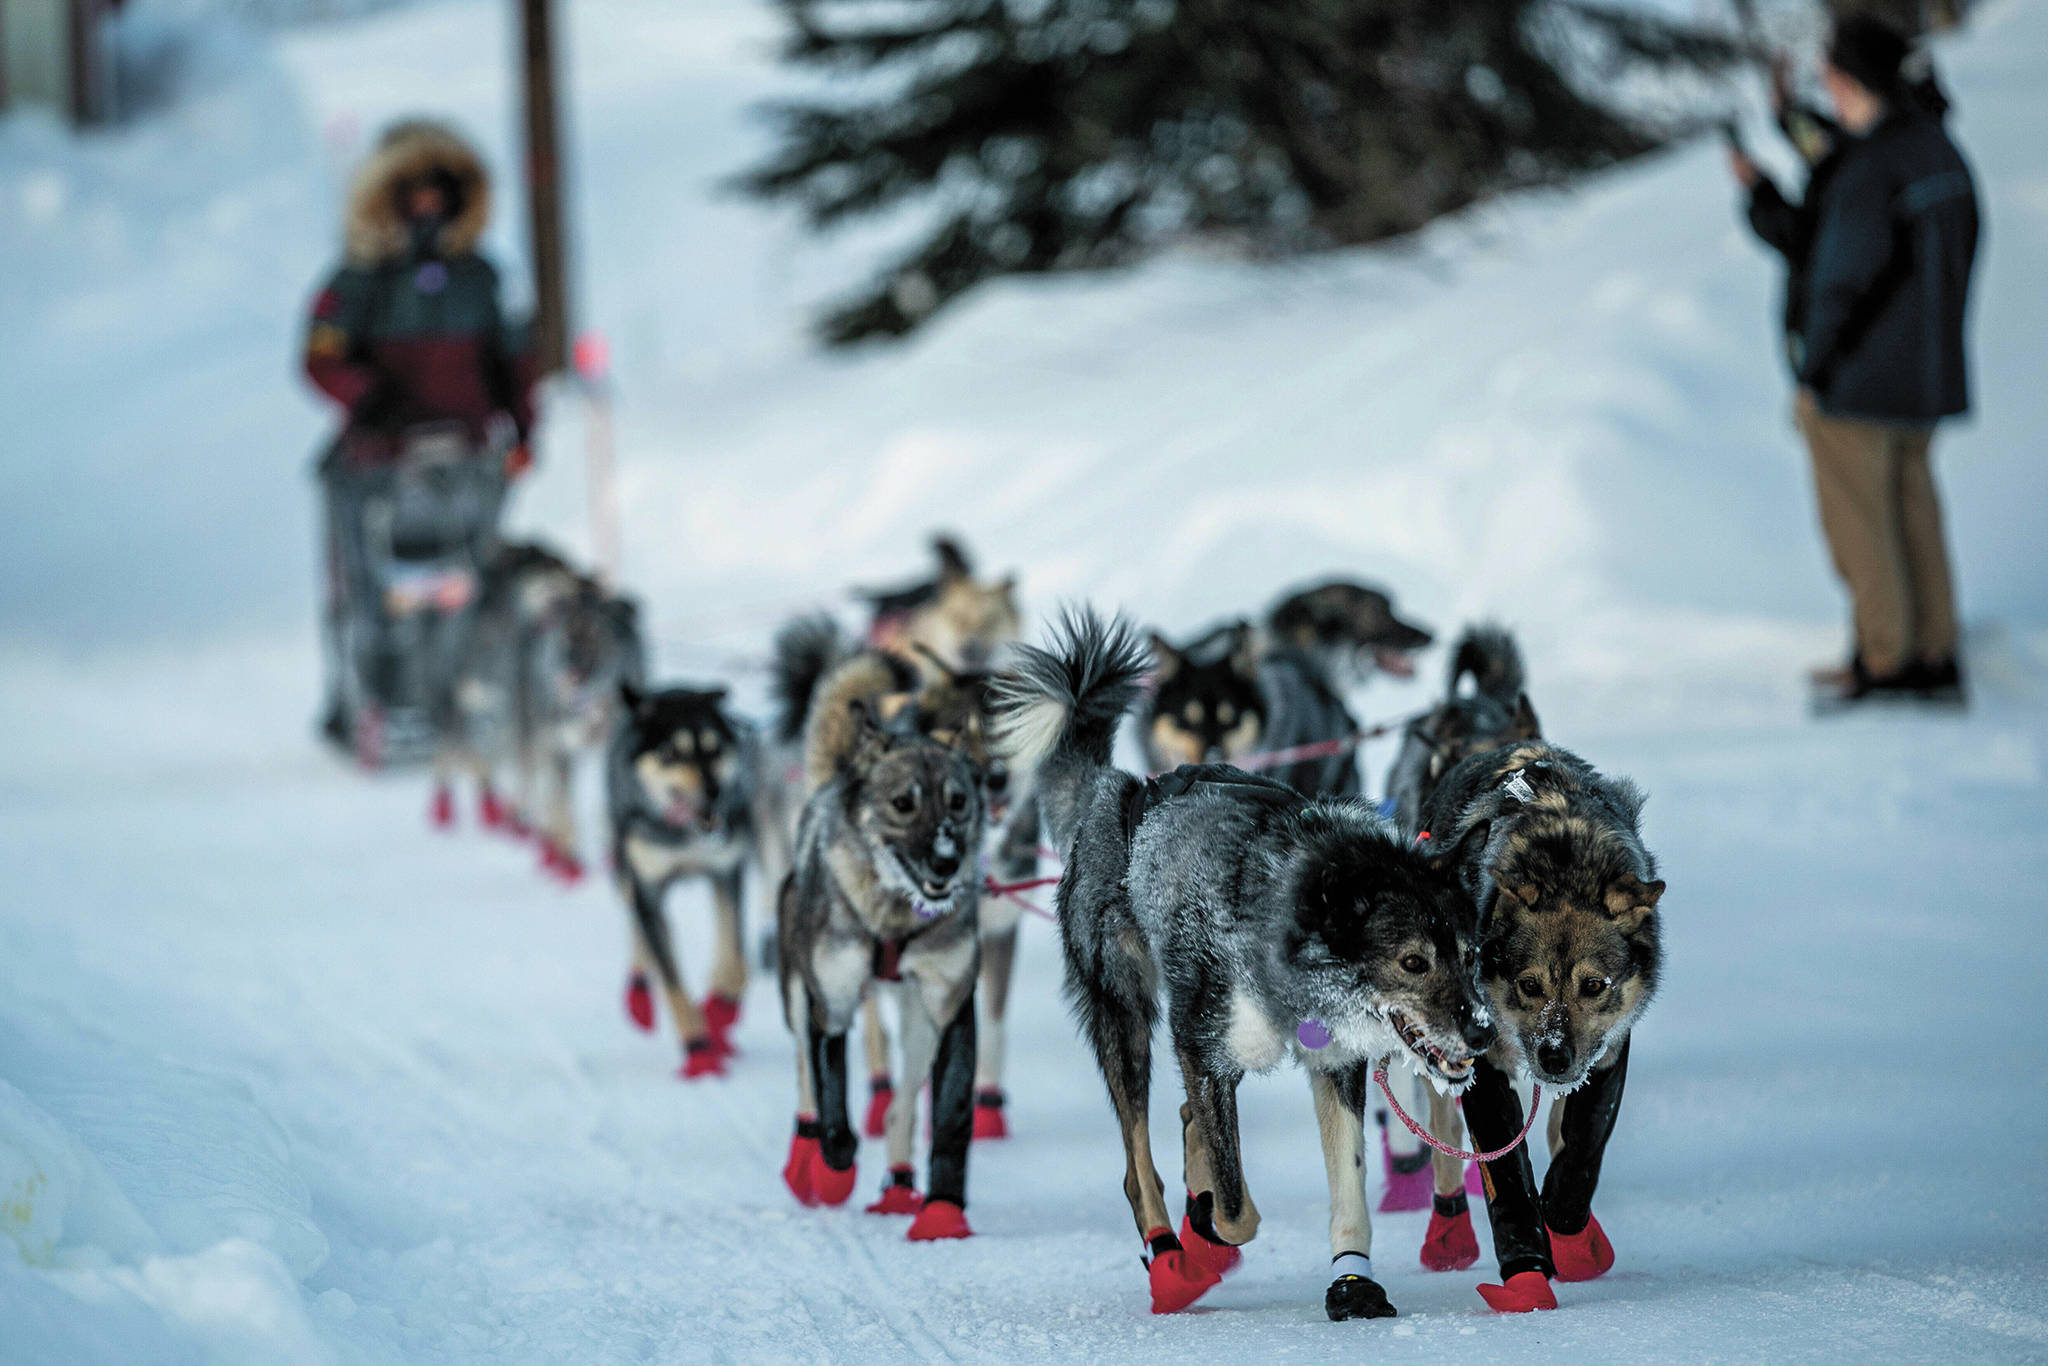 Richie Diehl arrives in Ruby, Alaska, Friday morning, March 13, 2020, during the Iditarod Trail Sled Dog Race. (Loren Holmes/Anchorage Daily News via AP)